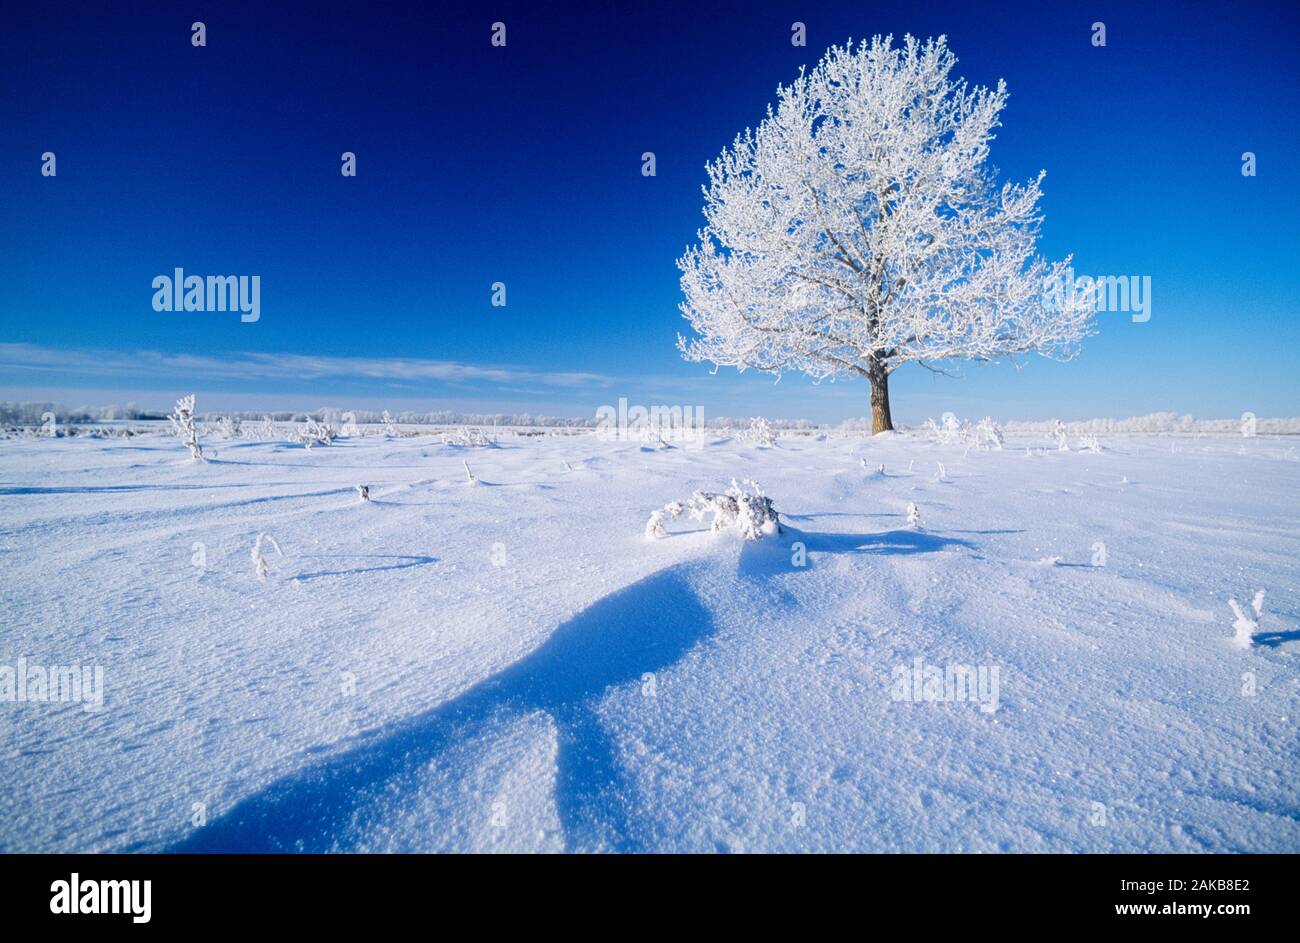 Landscape with single tree with frost in winter, Millet, Alberta, Canada Stock Photo